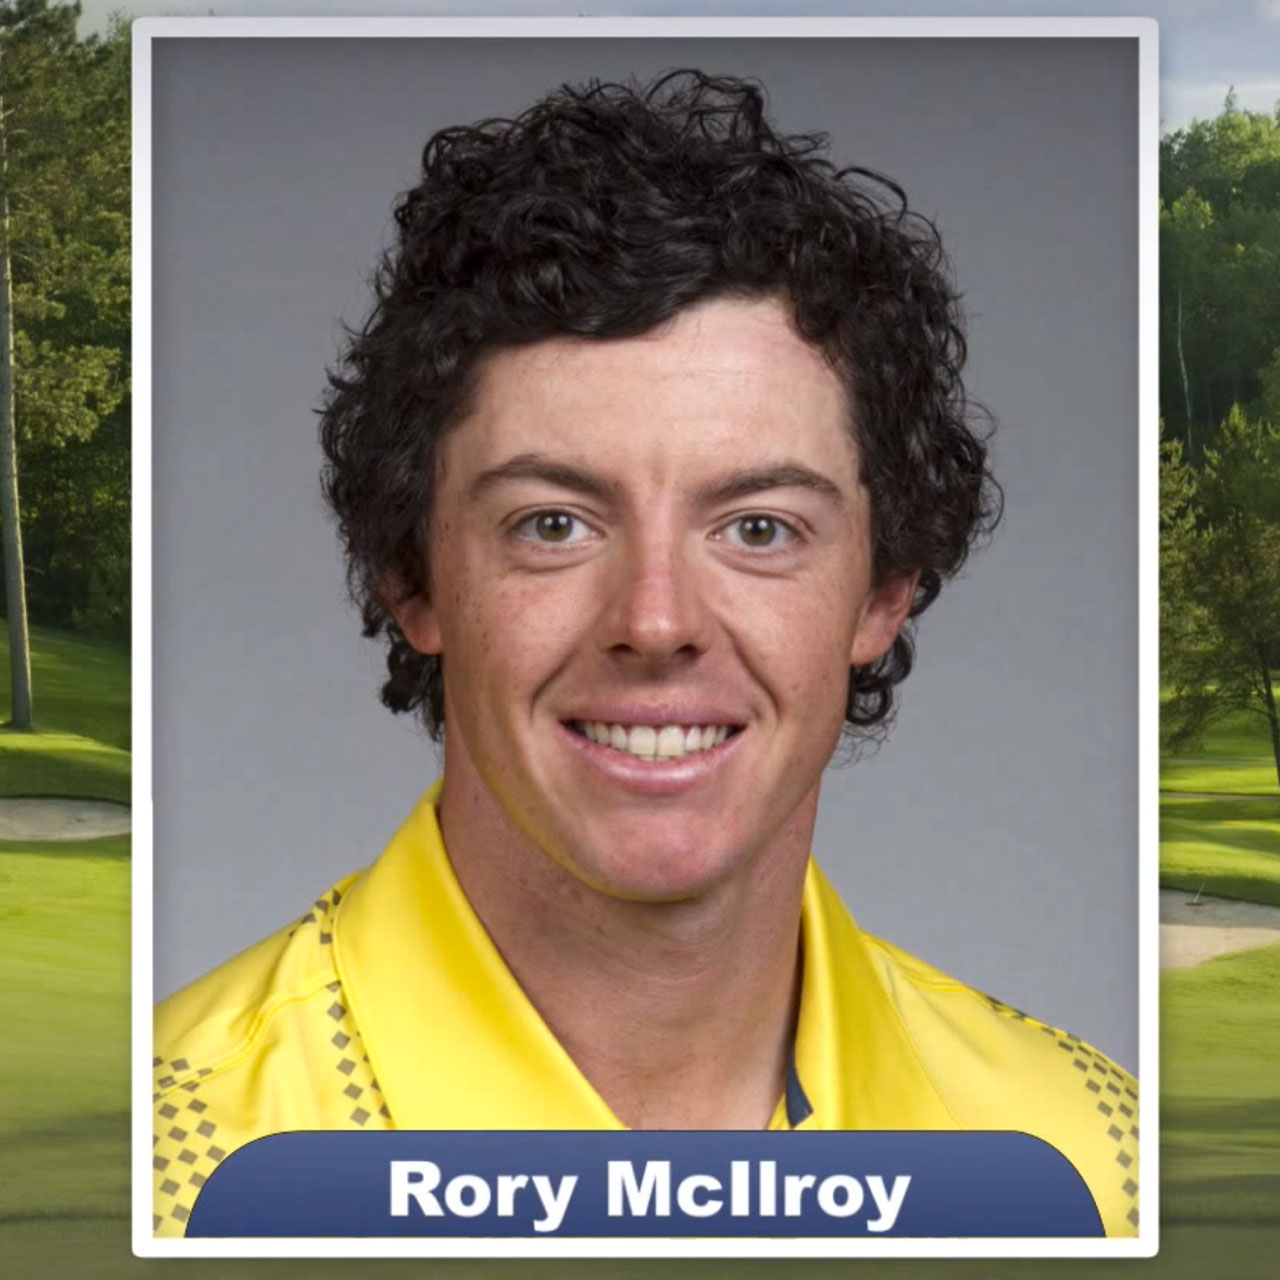 Rory McIlroy featured on "Tonight Show Superlatives" read by Jimmy Fallon